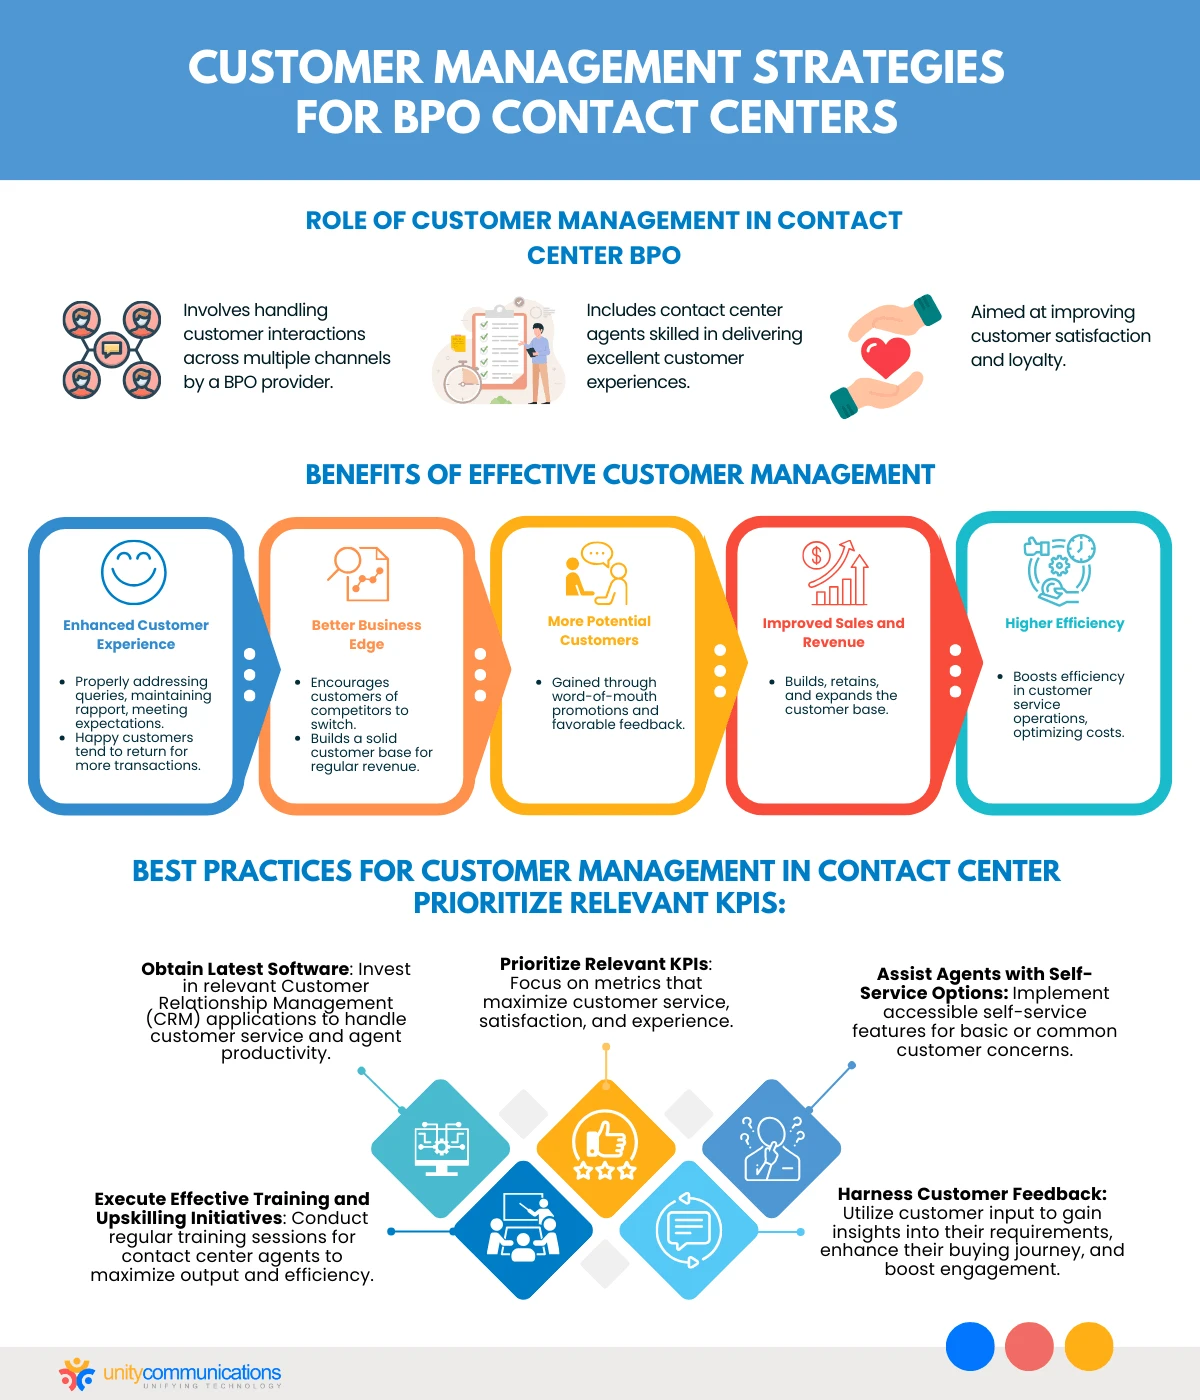 Customer Management Strategies for BPO Contact Centers